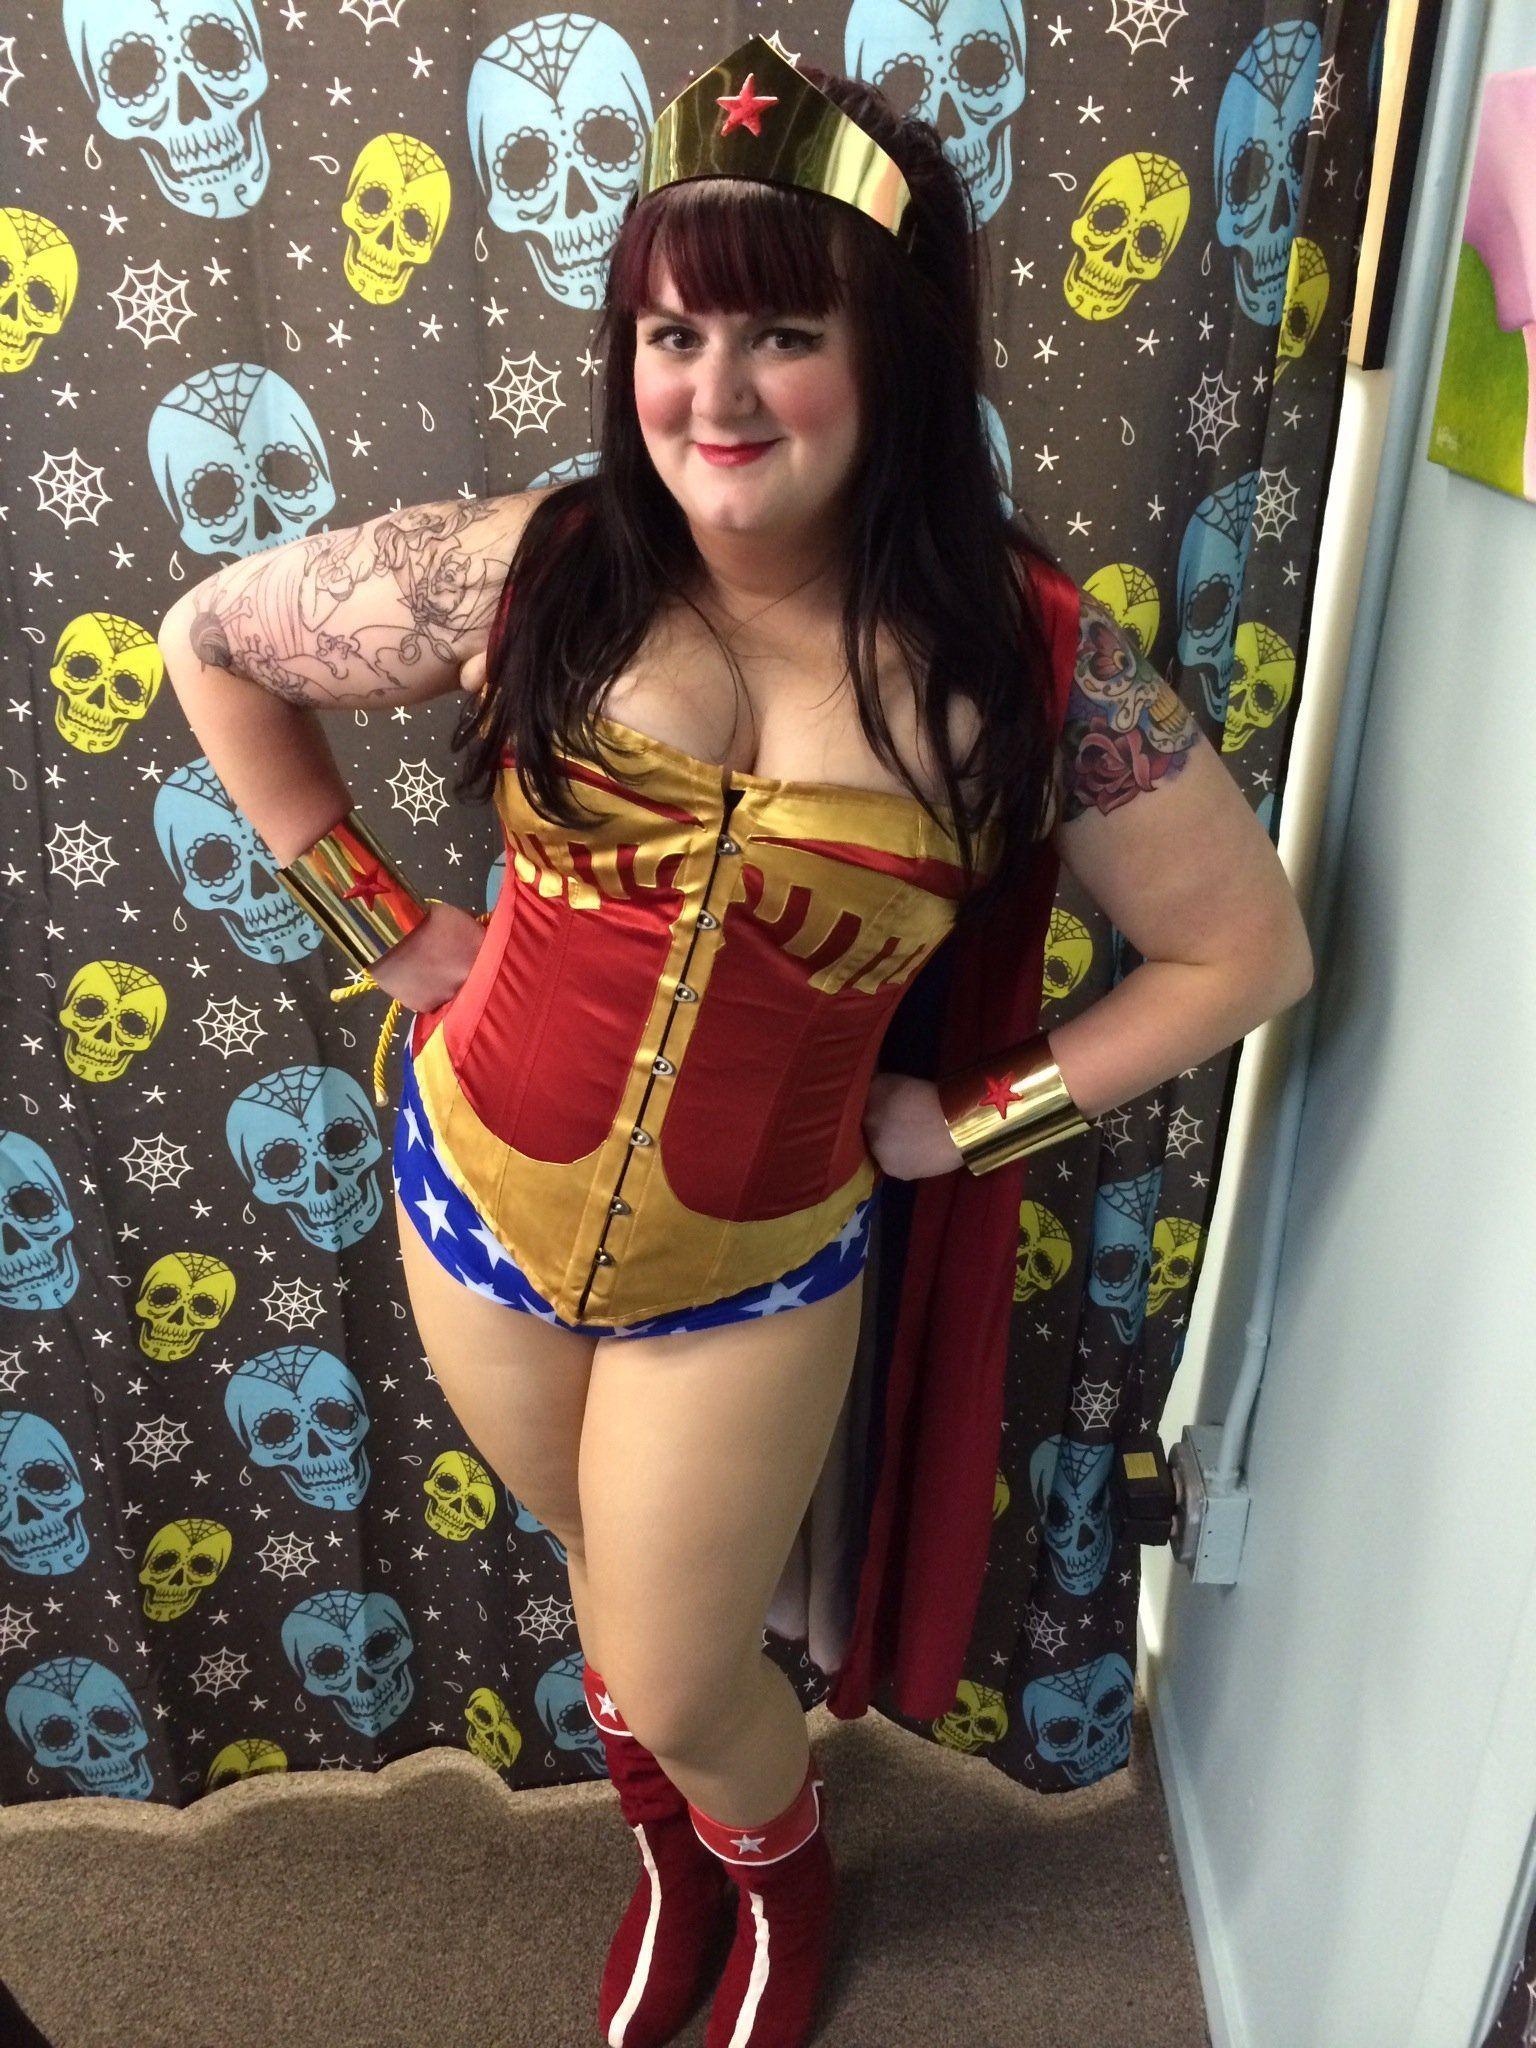 Chubby Girl Who Does Porn Cosplaying